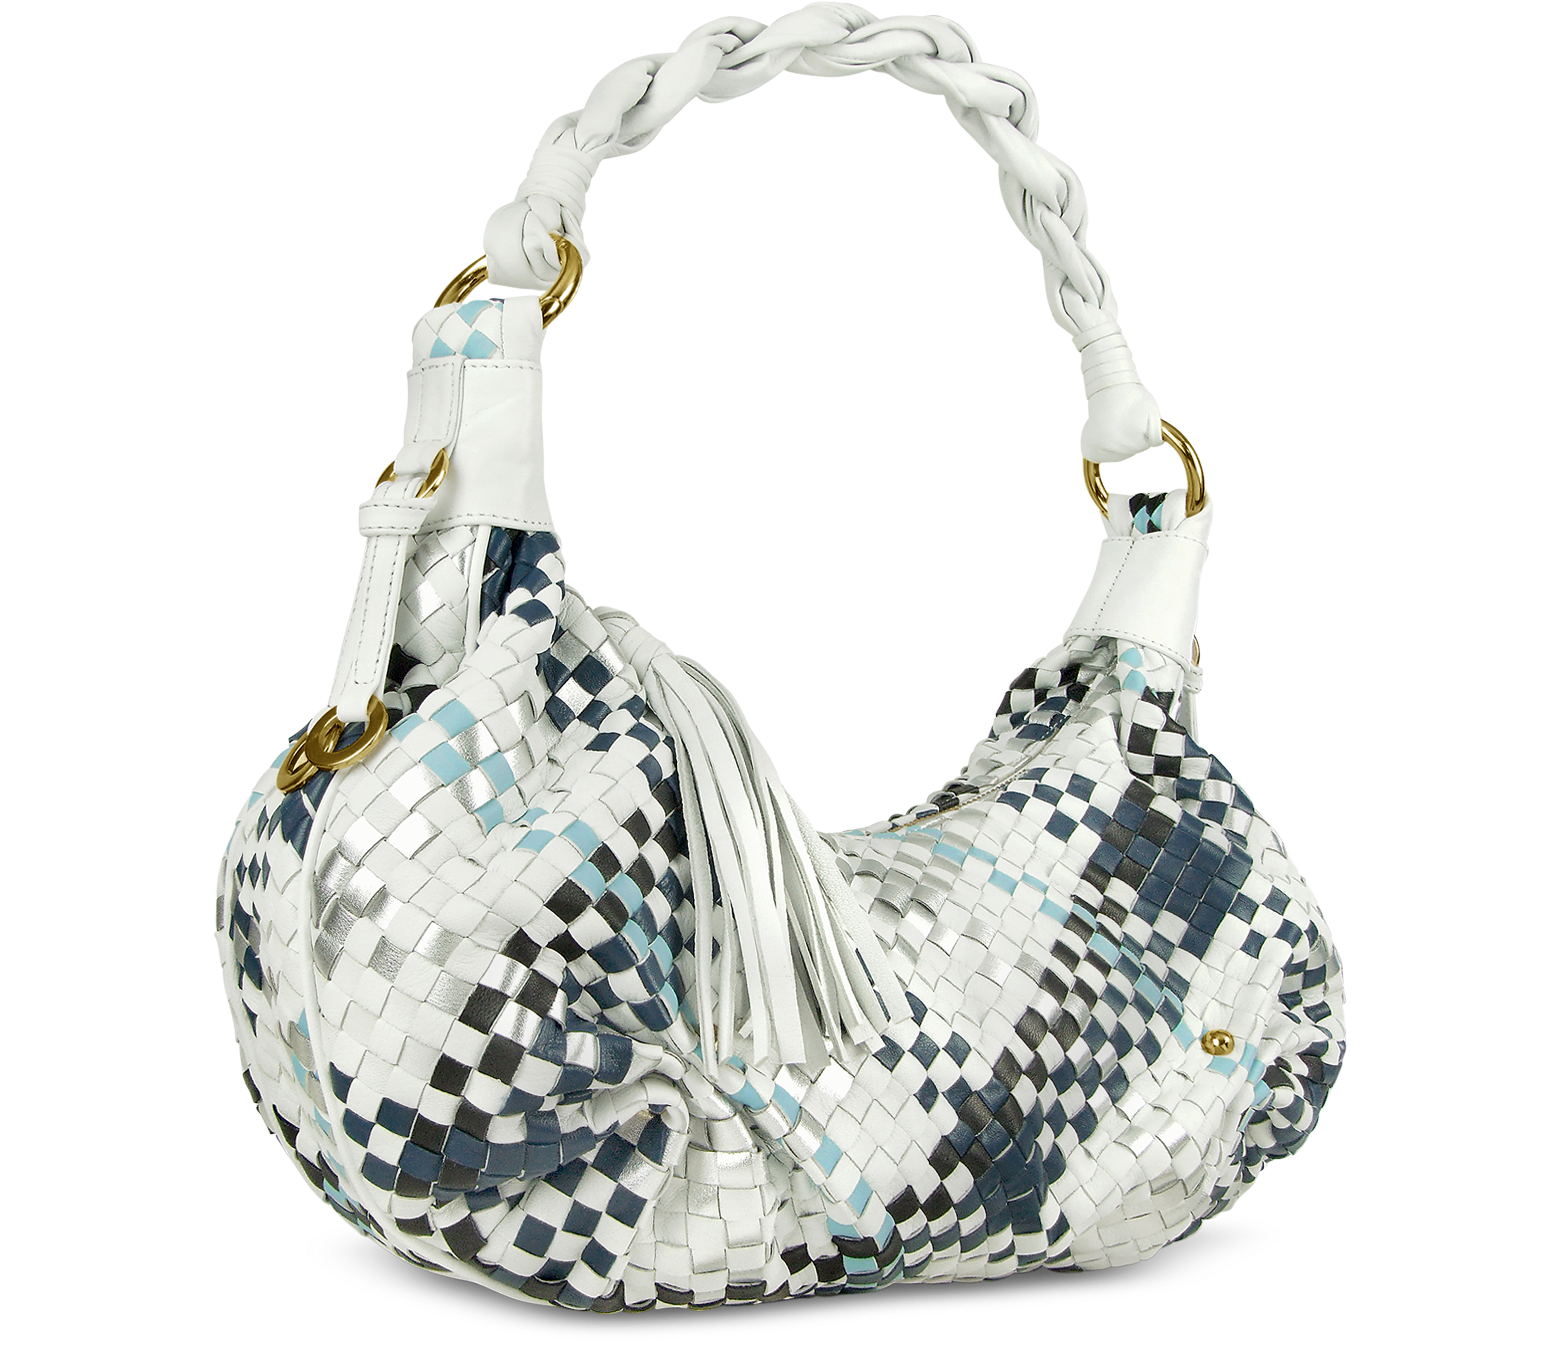 Fontanelli Blue & White Woven Leather East/West Hobo Bag at FORZIERI